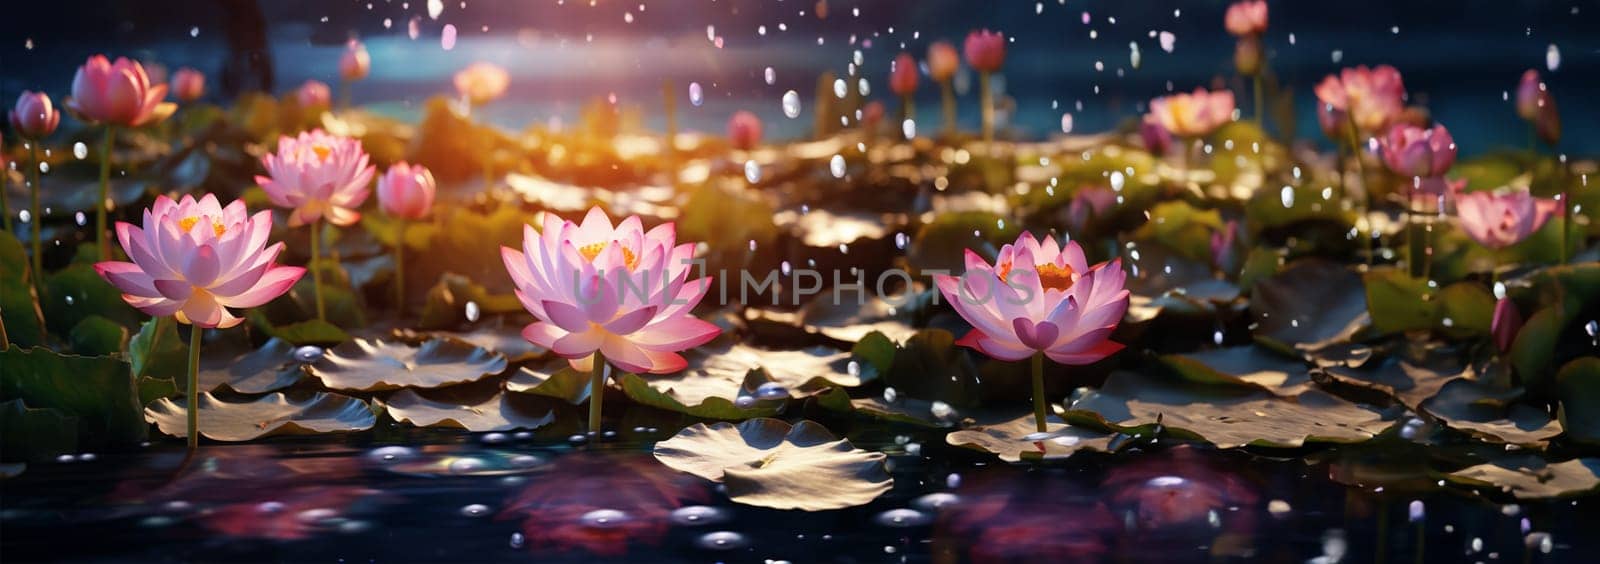 Magical pink water lily by night, lotus flower Orange Sunset in the garden pond. Close-up of Nymphaea reflected in water. Flower landscape for nature wallpaper. background copy space. Sparkling bokeh lights. Lotus flower magic by Annebel146